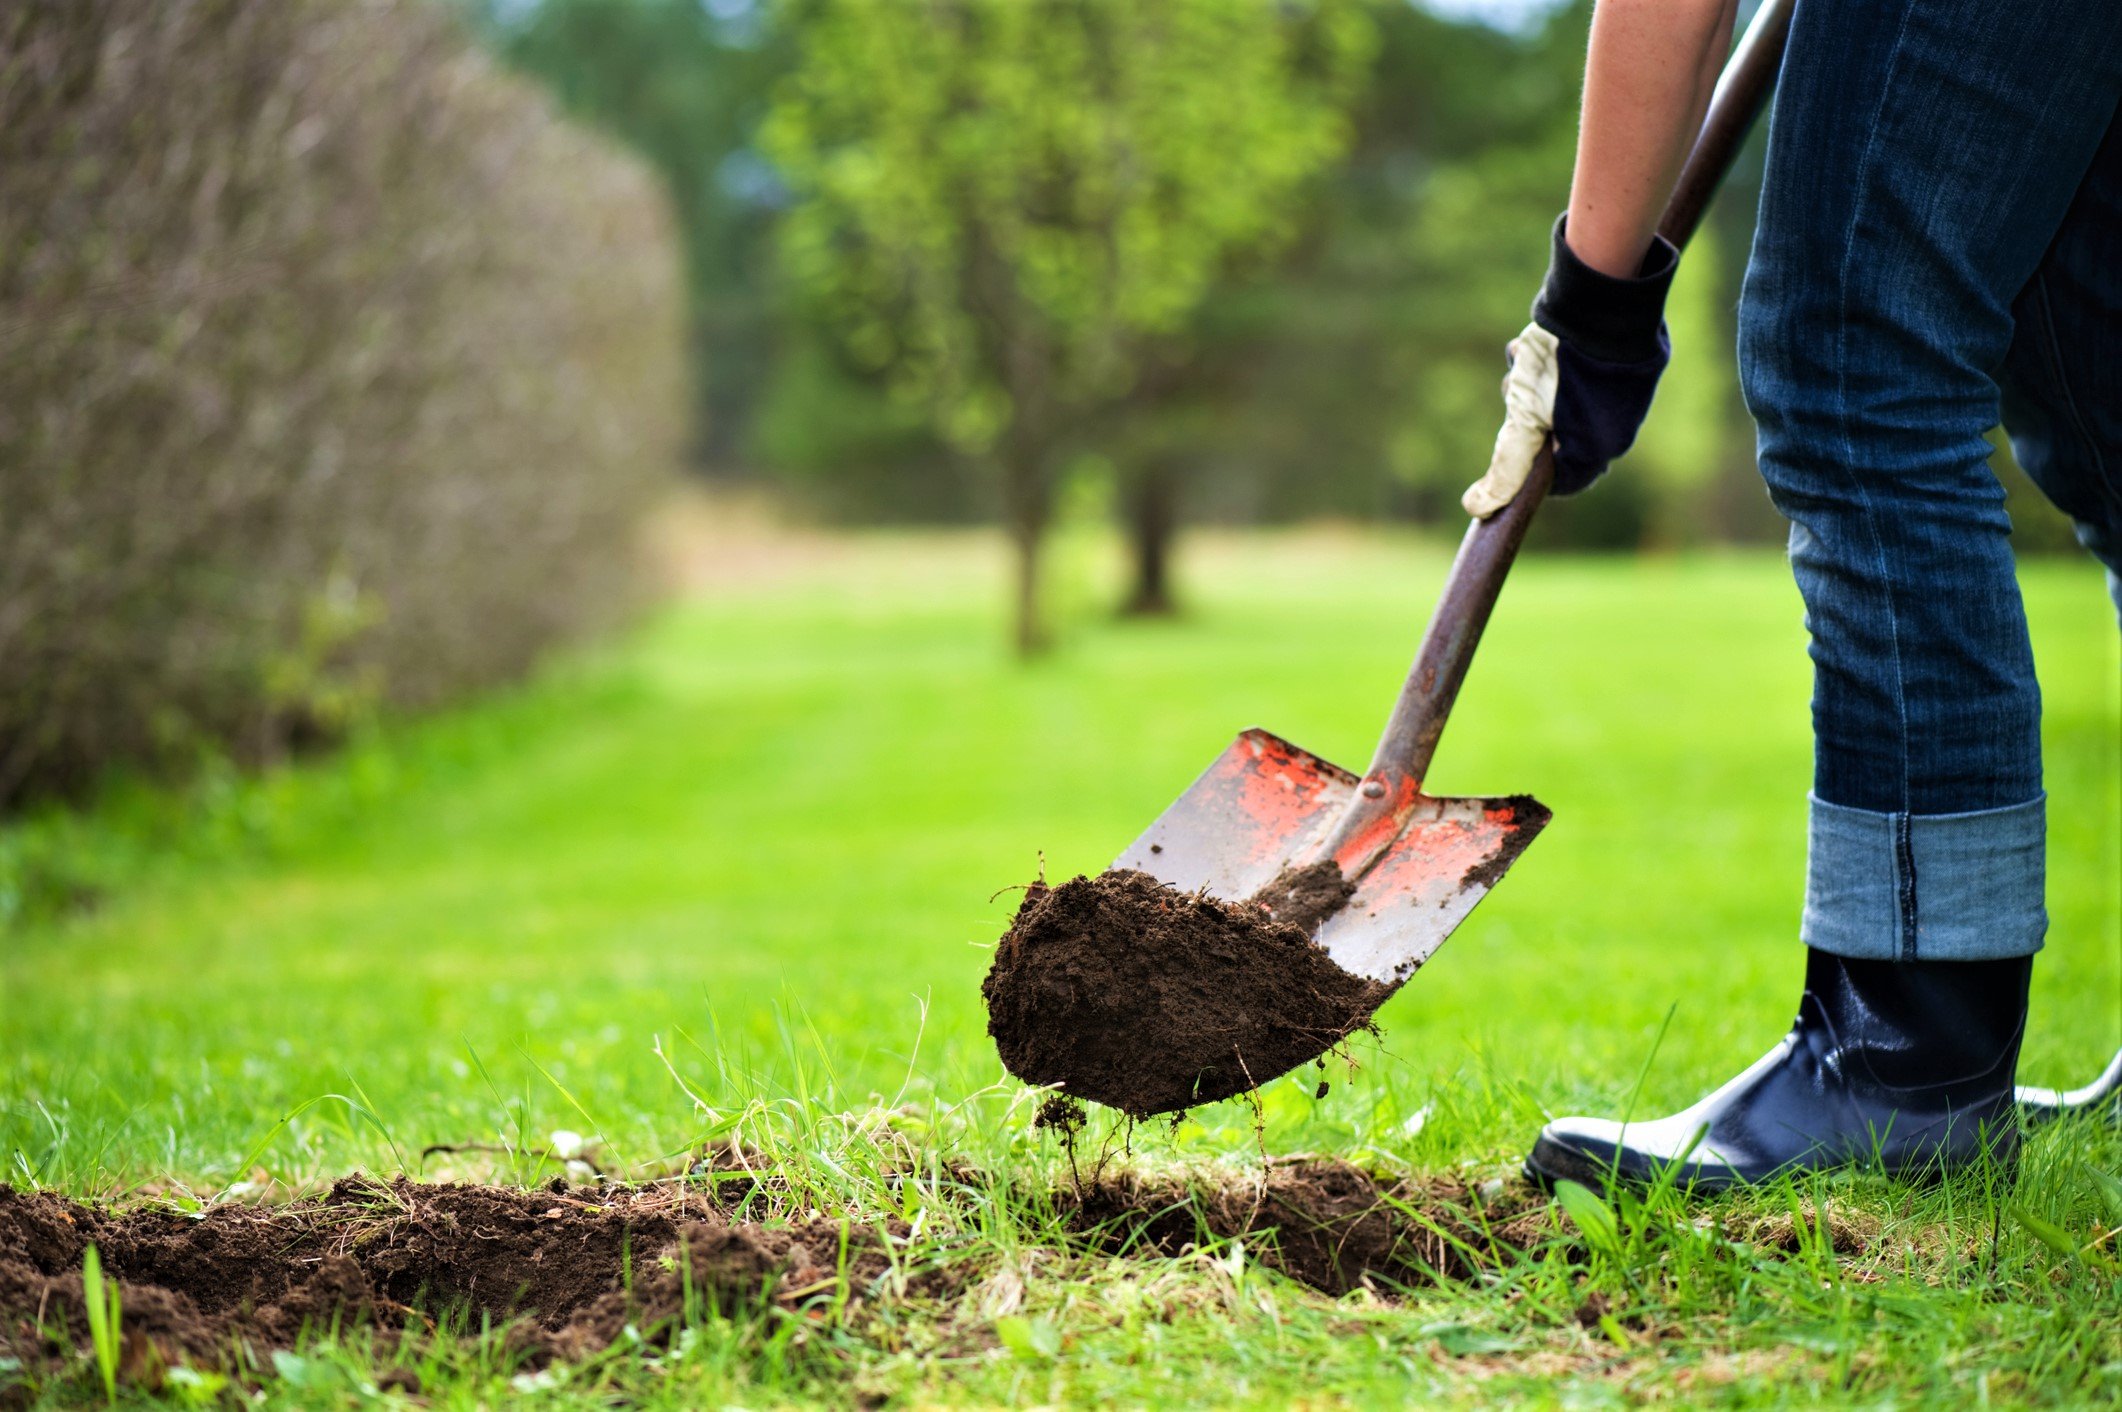 Stay safe while digging in your yard